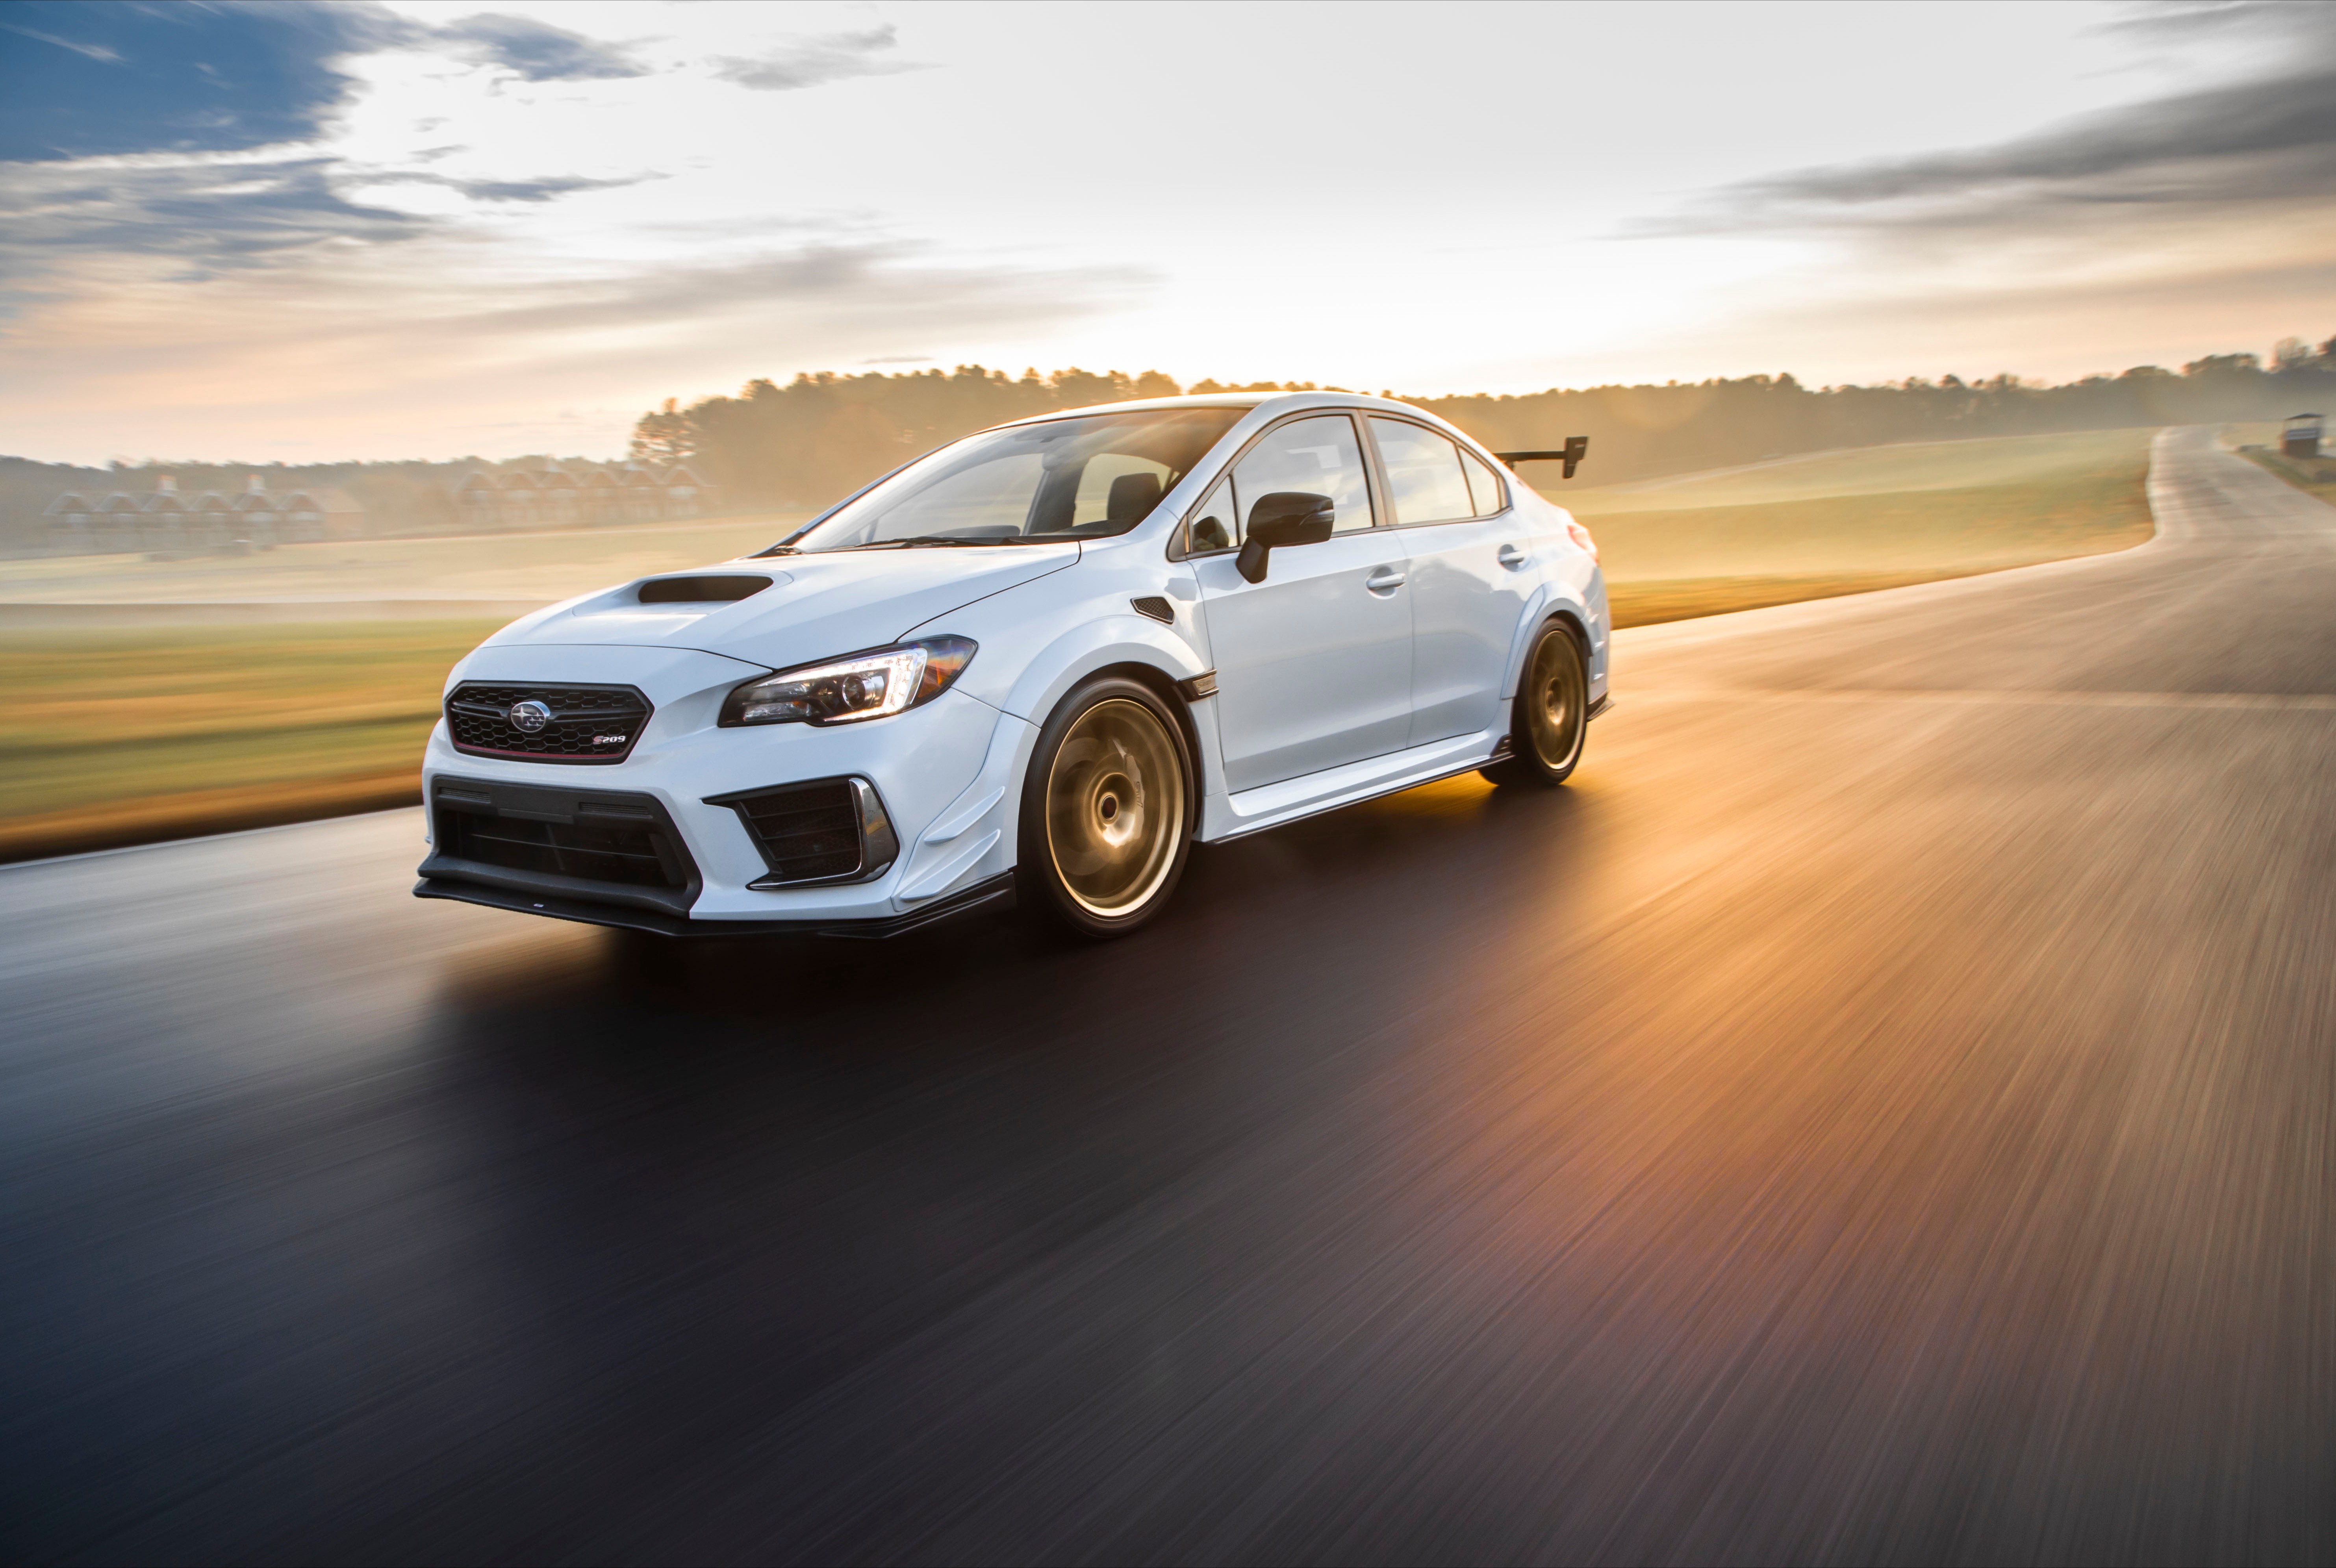 30+ Subaru WRX HD Wallpapers and Backgrounds